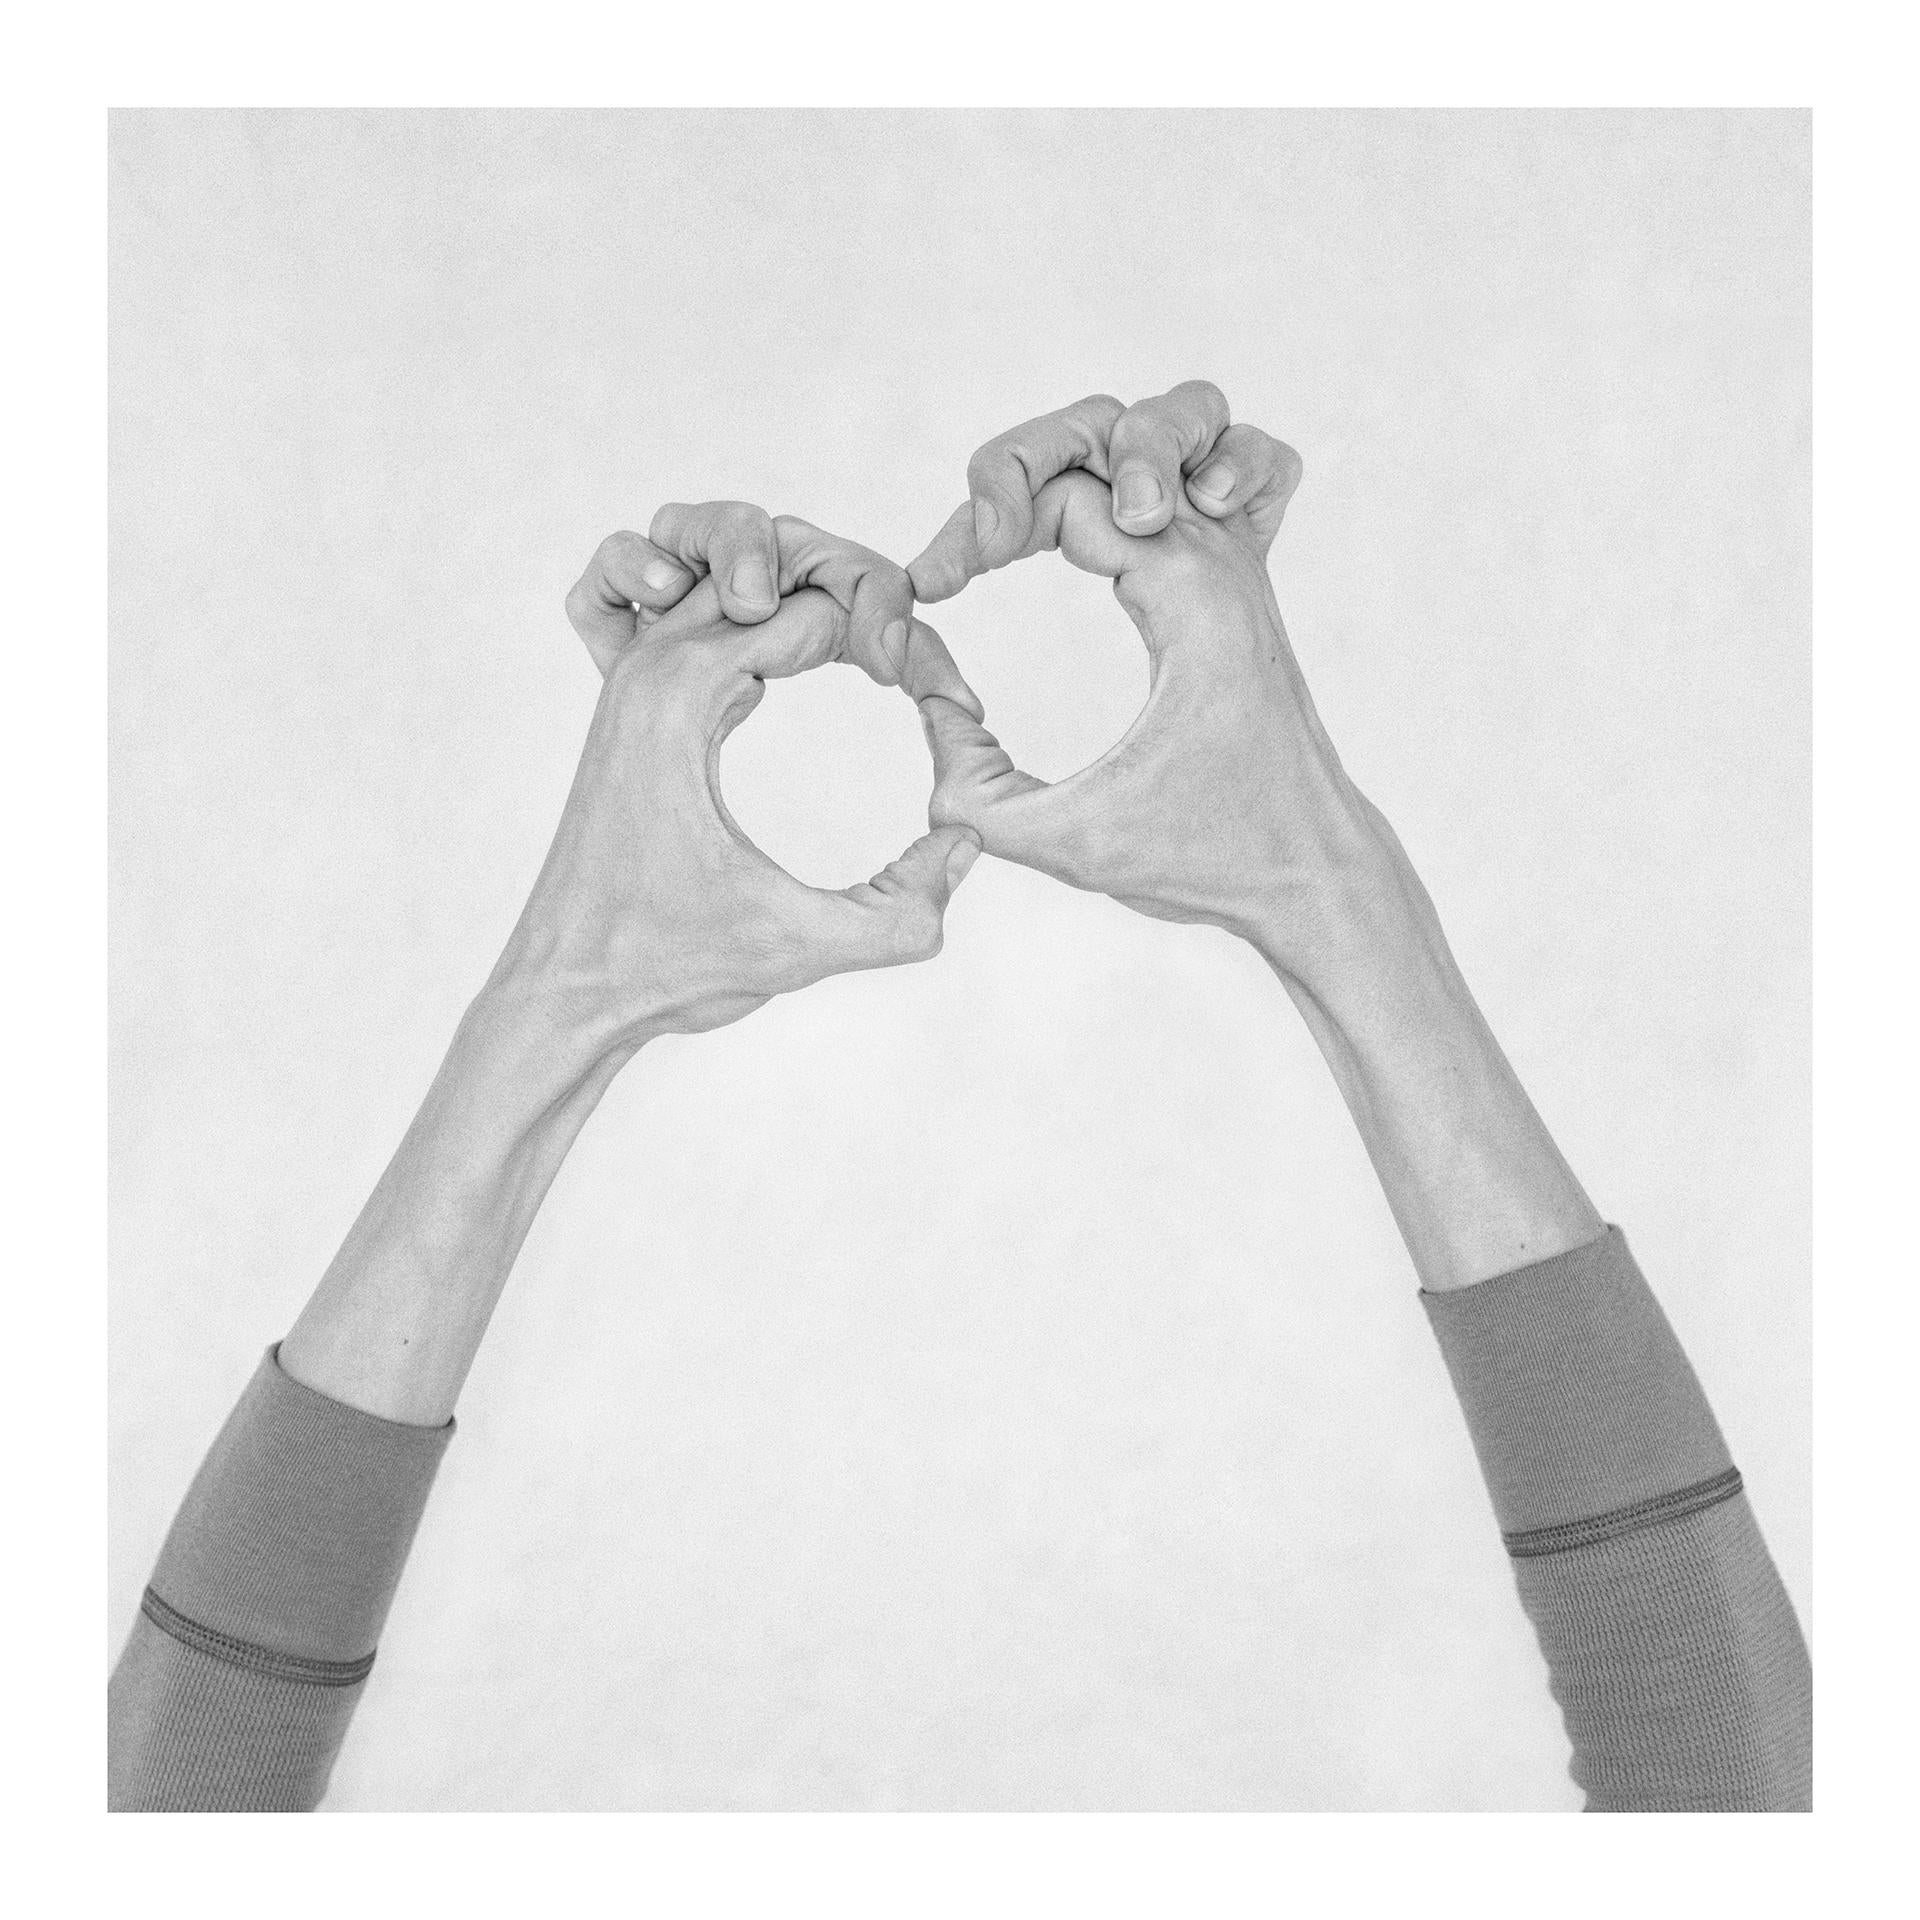 Nico Baixas / Gos-com-fuig Figurative Photograph - Untitled XXXIX. From the Series Chiromorphose. Hands. Black & White Photography